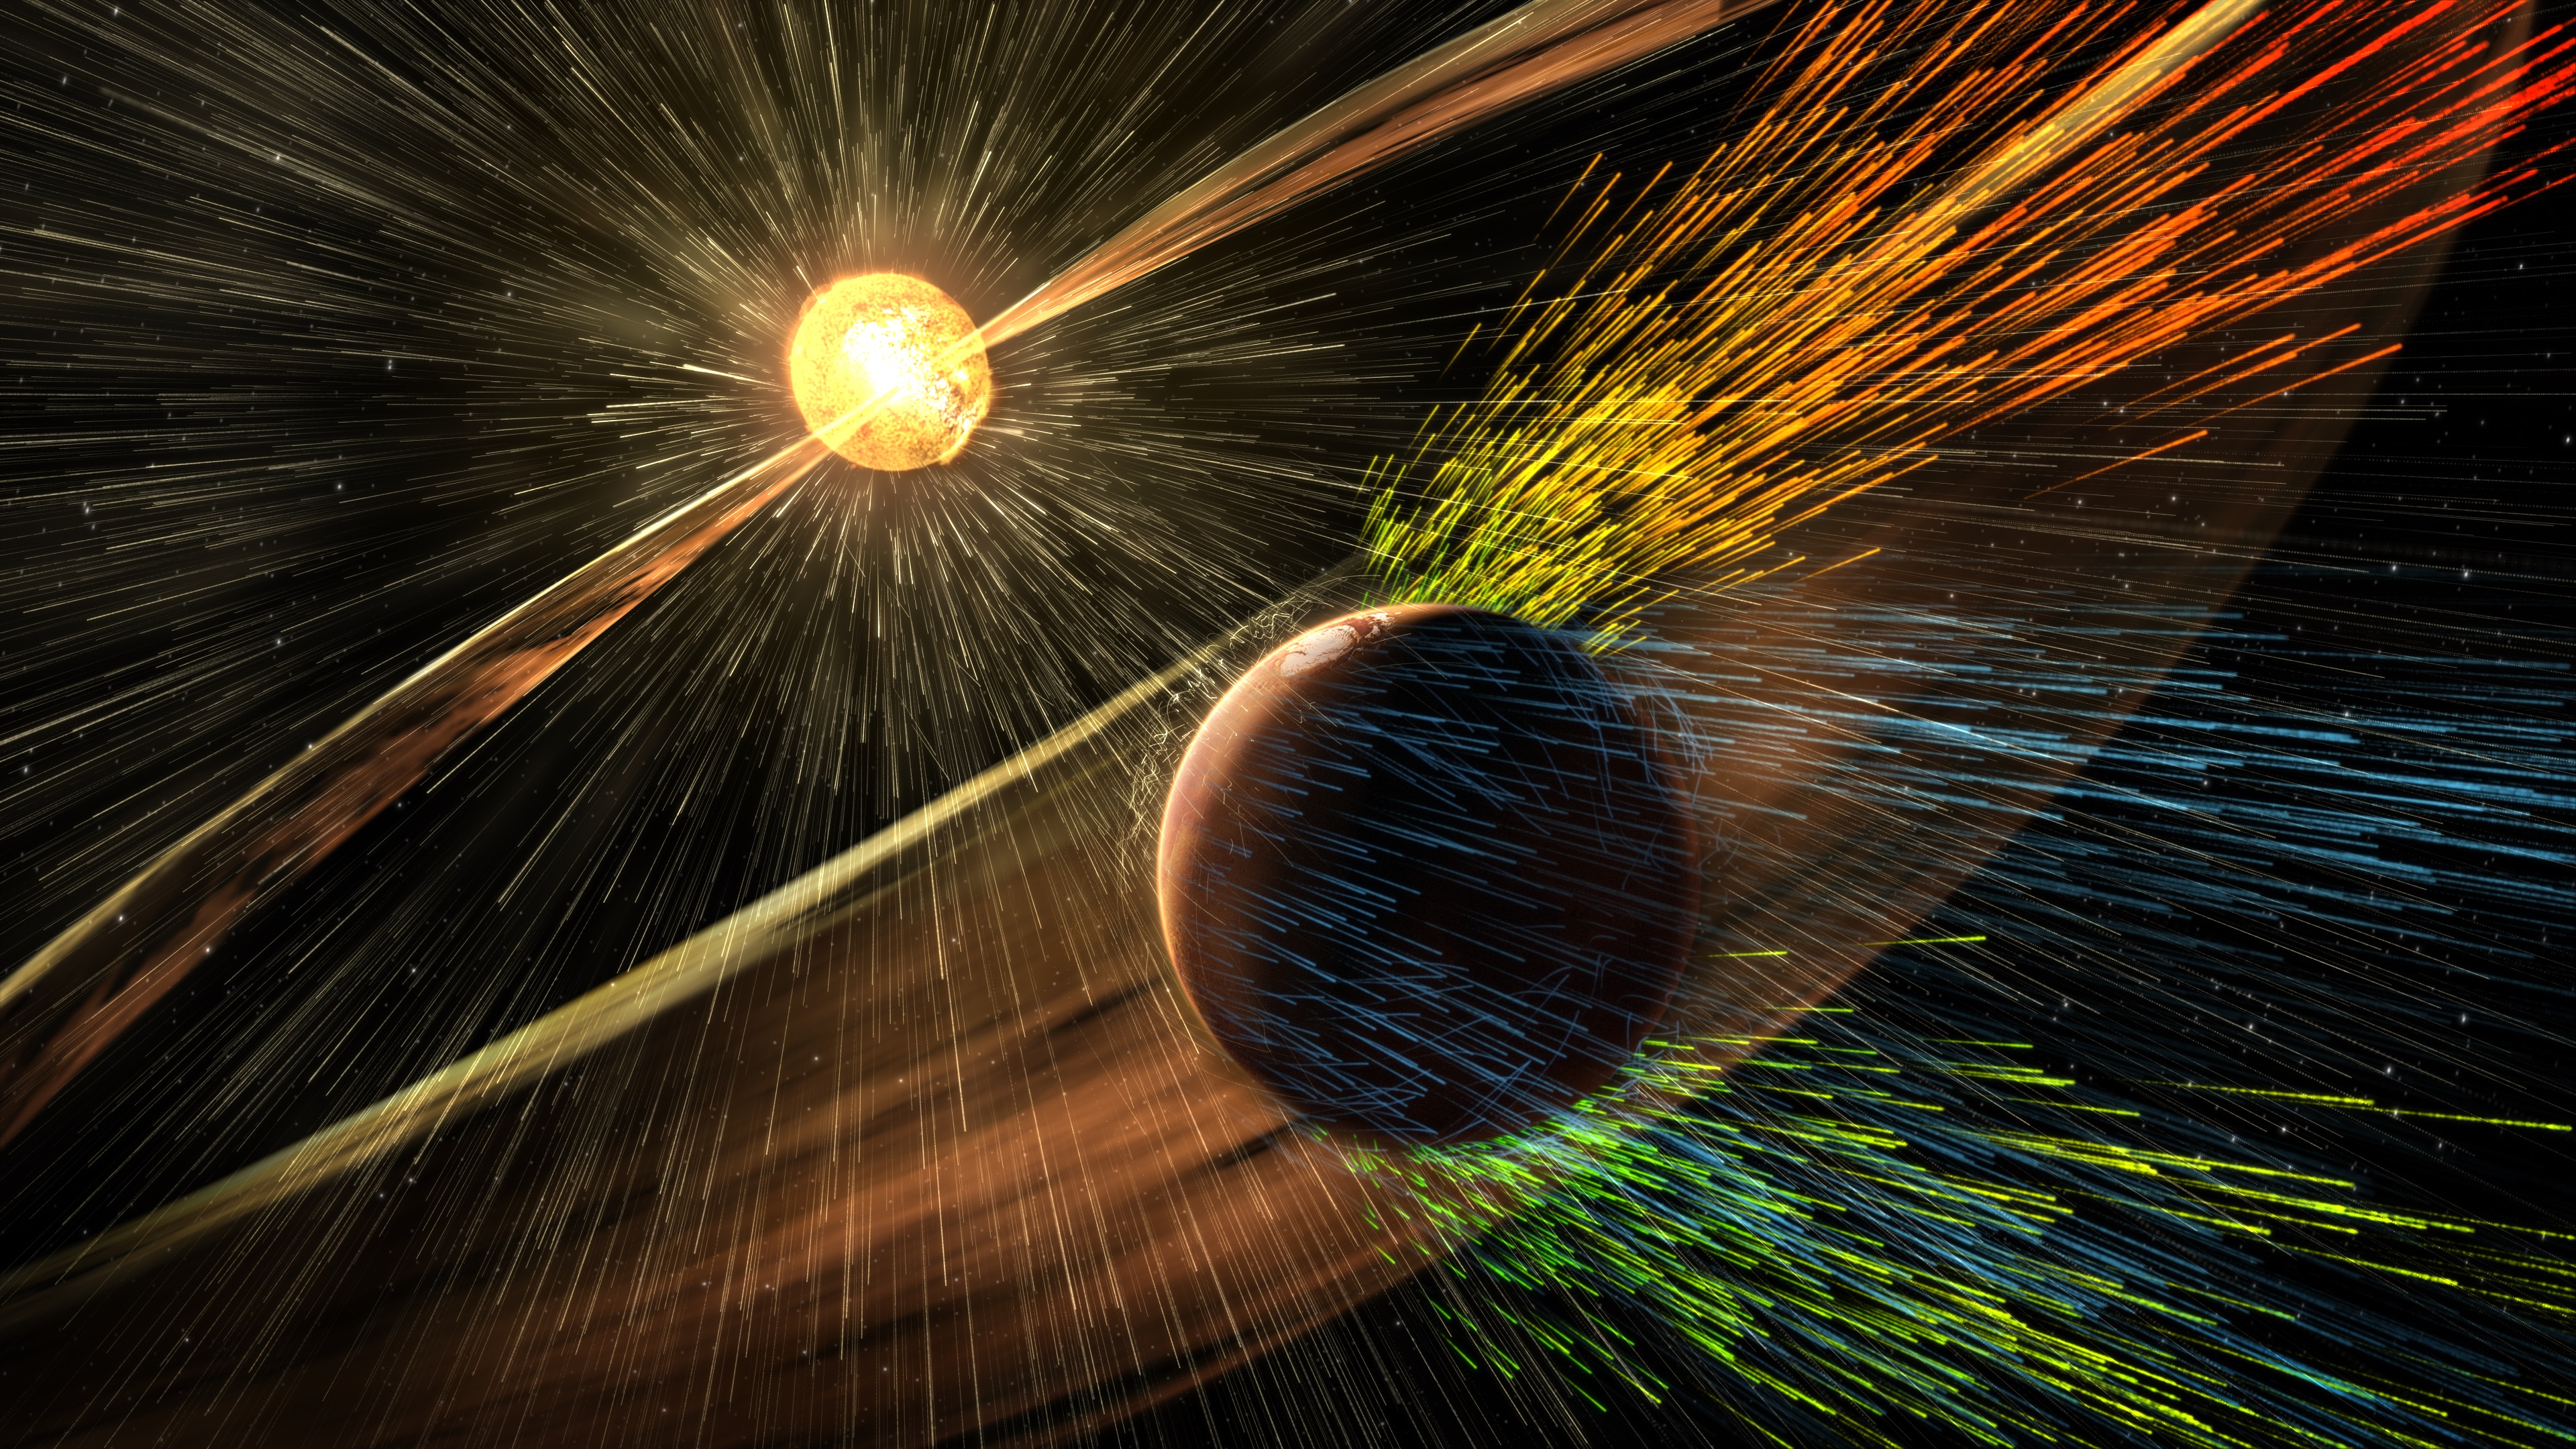 Artist’s rendition of a solar storm hitting Mars and stripping ions from the upper atmosphere. Credit: NASA/GSFC